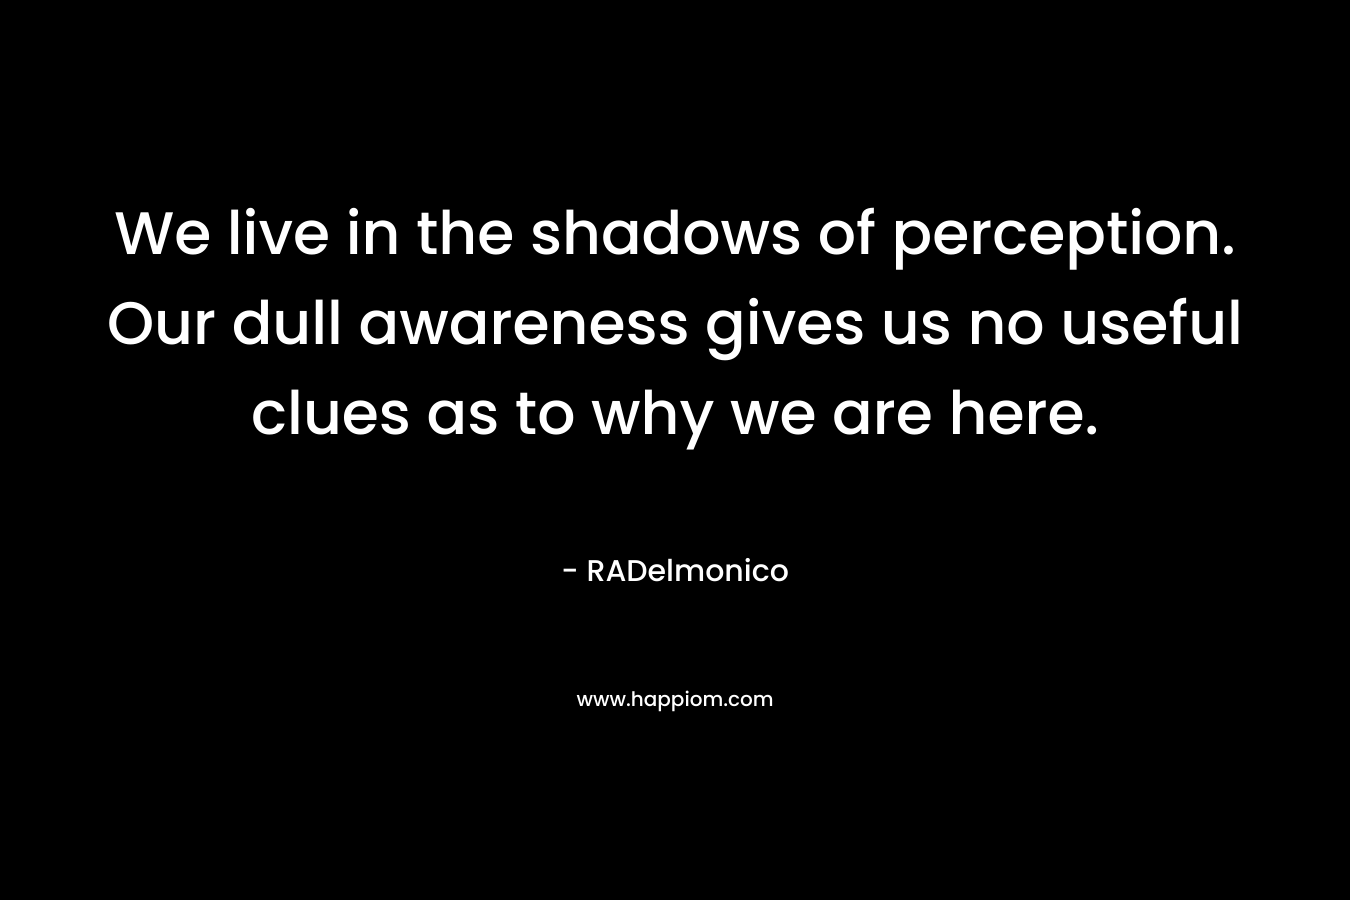 We live in the shadows of perception. Our dull awareness gives us no useful clues as to why we are here.